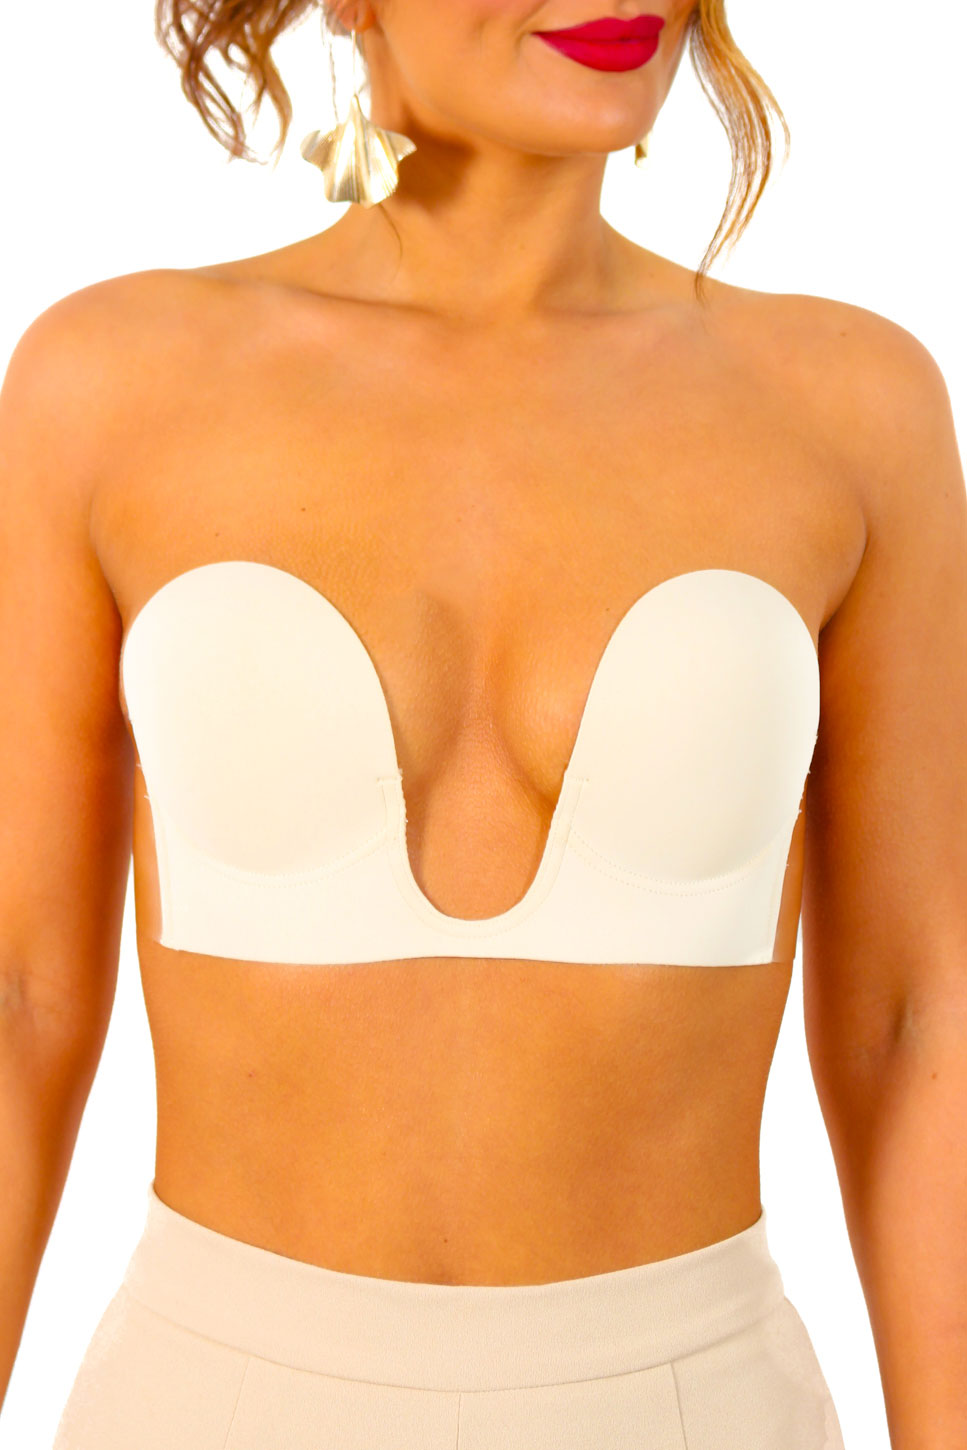 Wrap a bra strap below your strapless bra to keep it from slipping down all  evening.